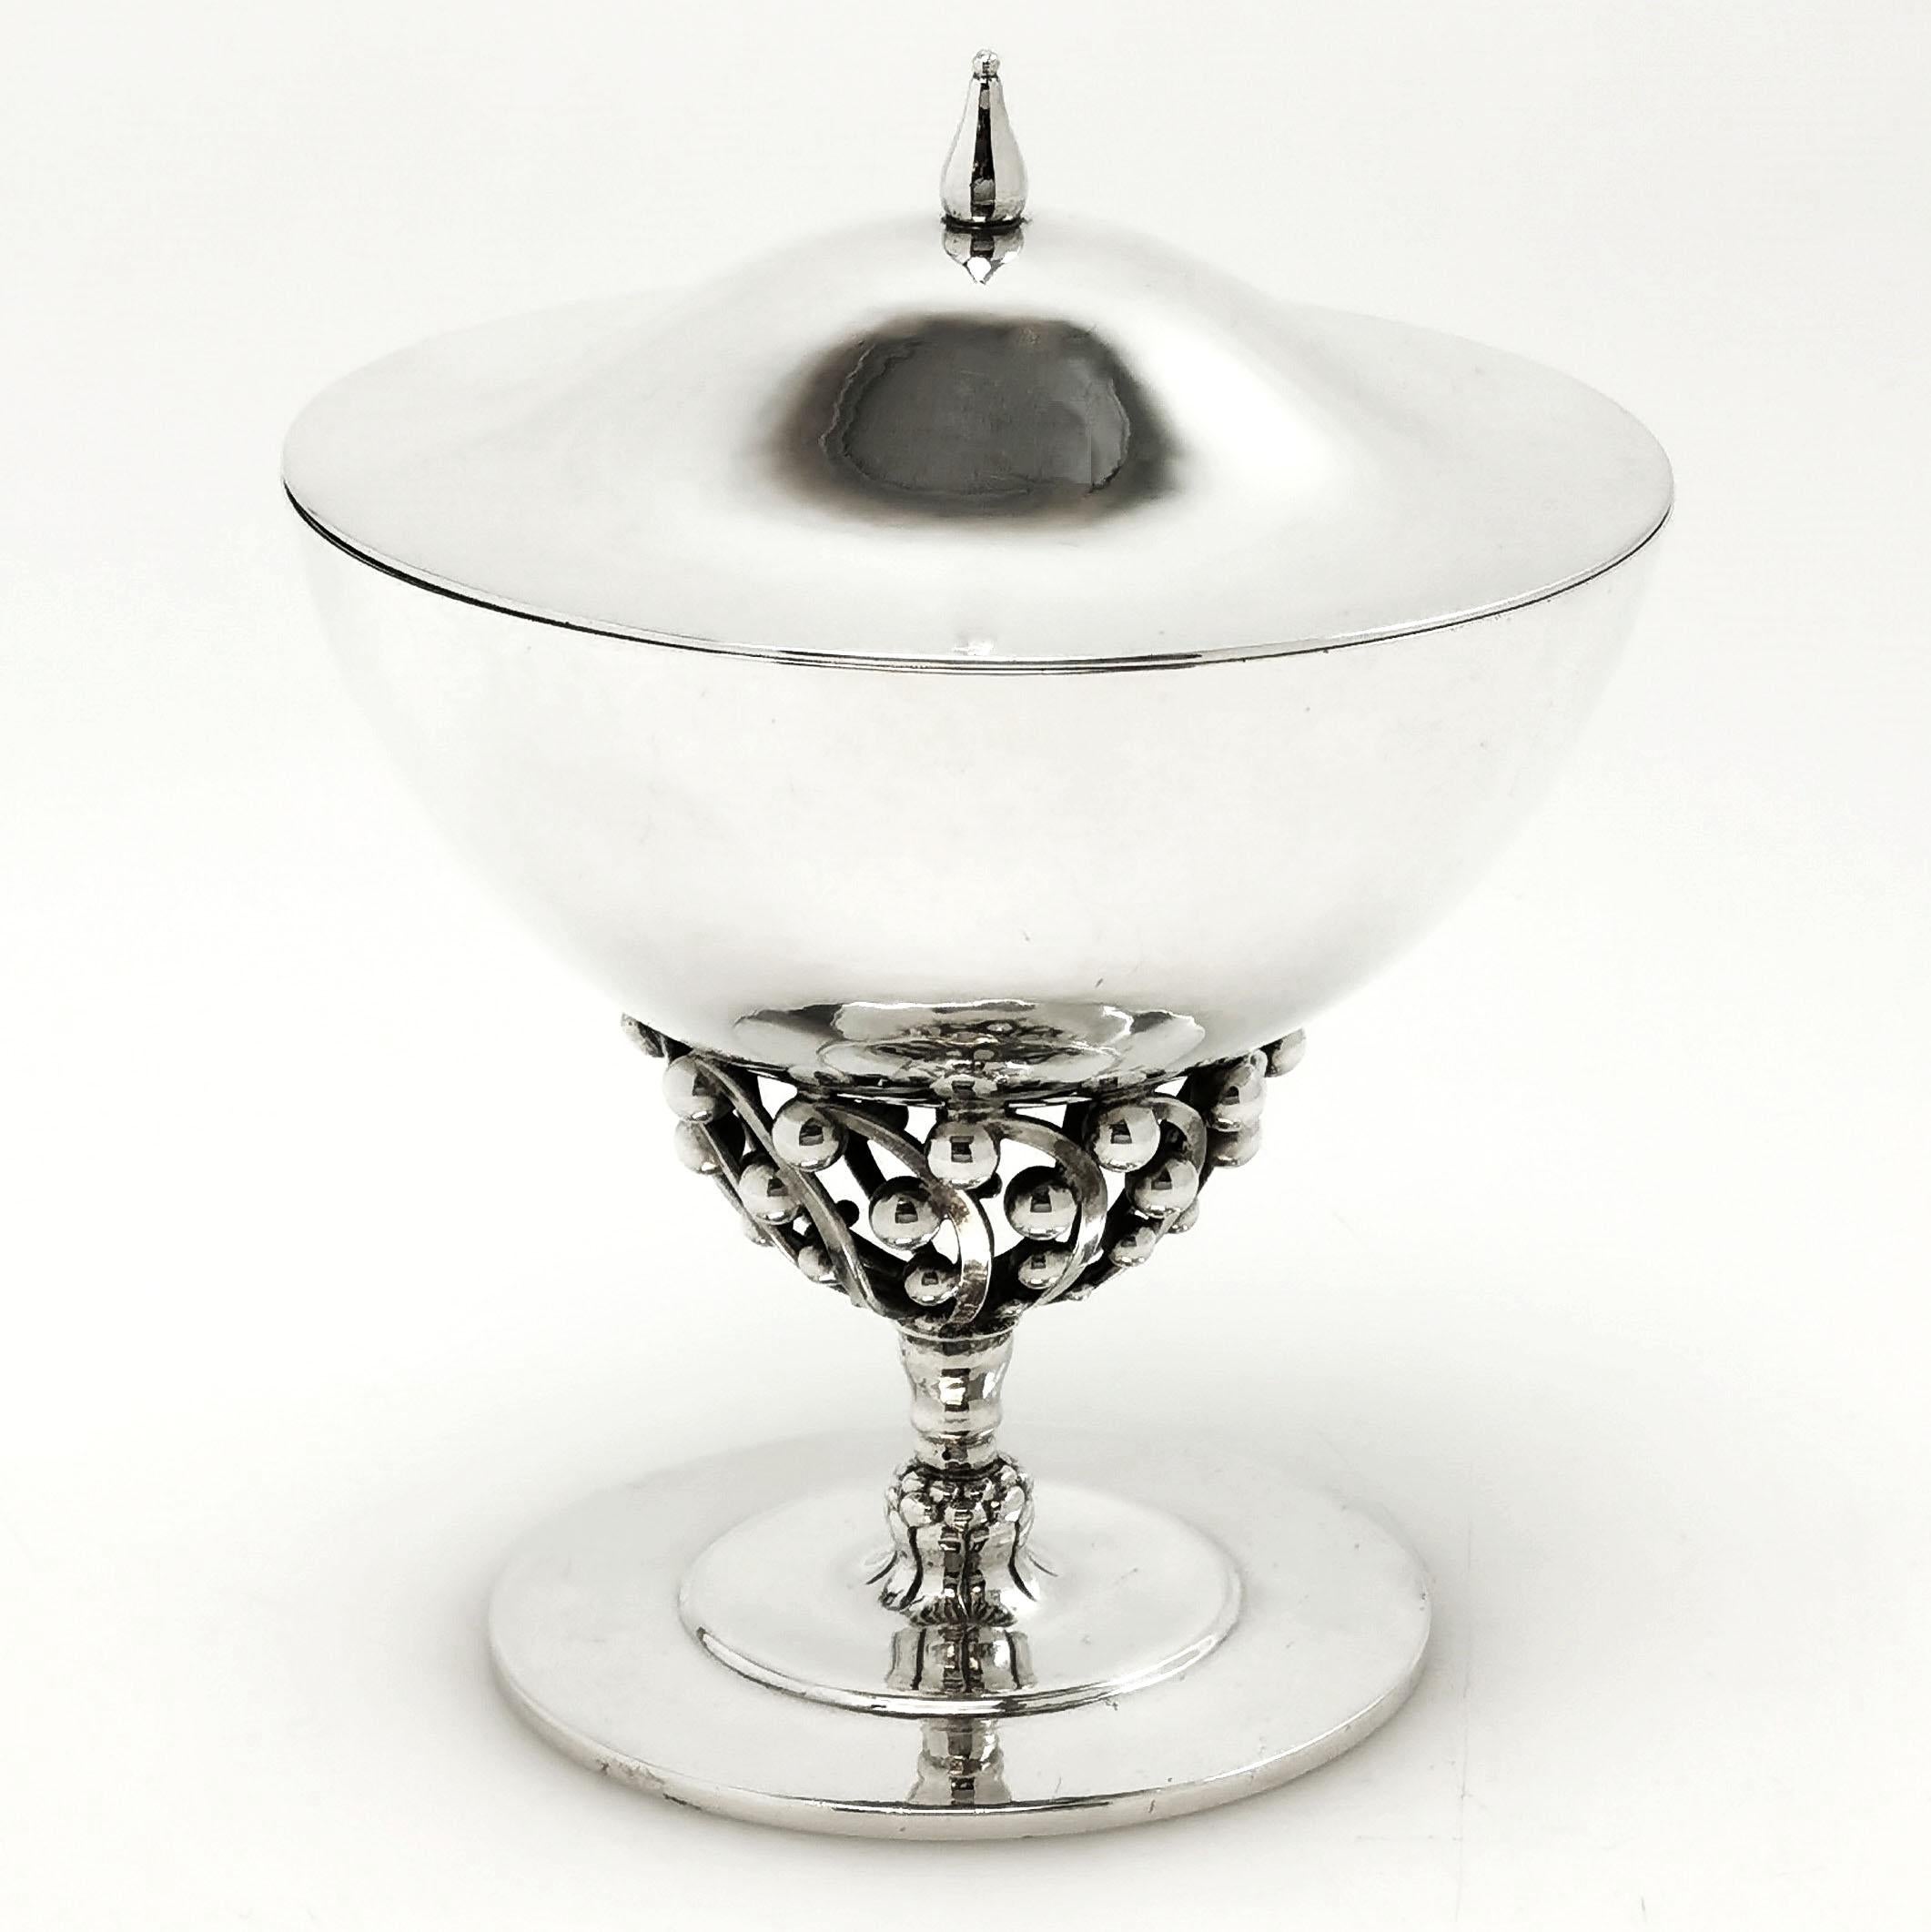 A pretty Georg Jensen Danish Silver lidded Bowl on tall stem with and open scroll and bead design. The Dish has an elegant domed lid with a pointed finial. The Bowl stands on on a flat stepped circular foot.

Made by Georg Jensen in Denmark circa